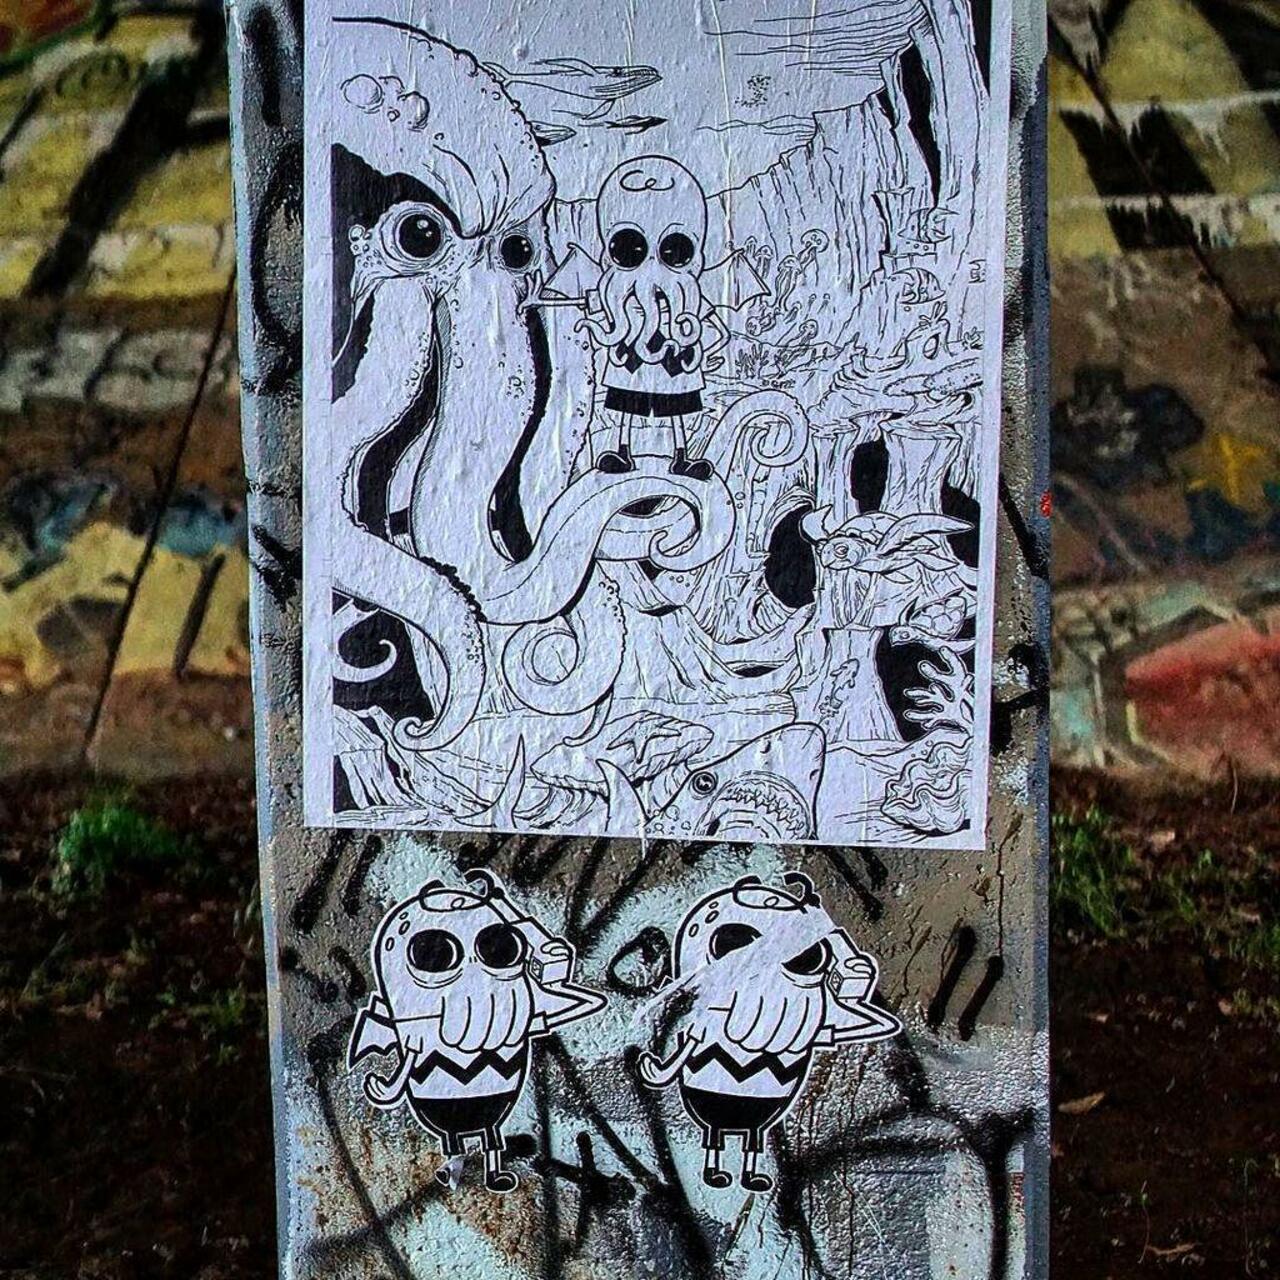 Nice pic from IG: http://ift.tt/1UgpzsK out on the #beltline #atlanta #downtown #graffiti #stickers #streetart #… http://t.co/ma9ojHGueE